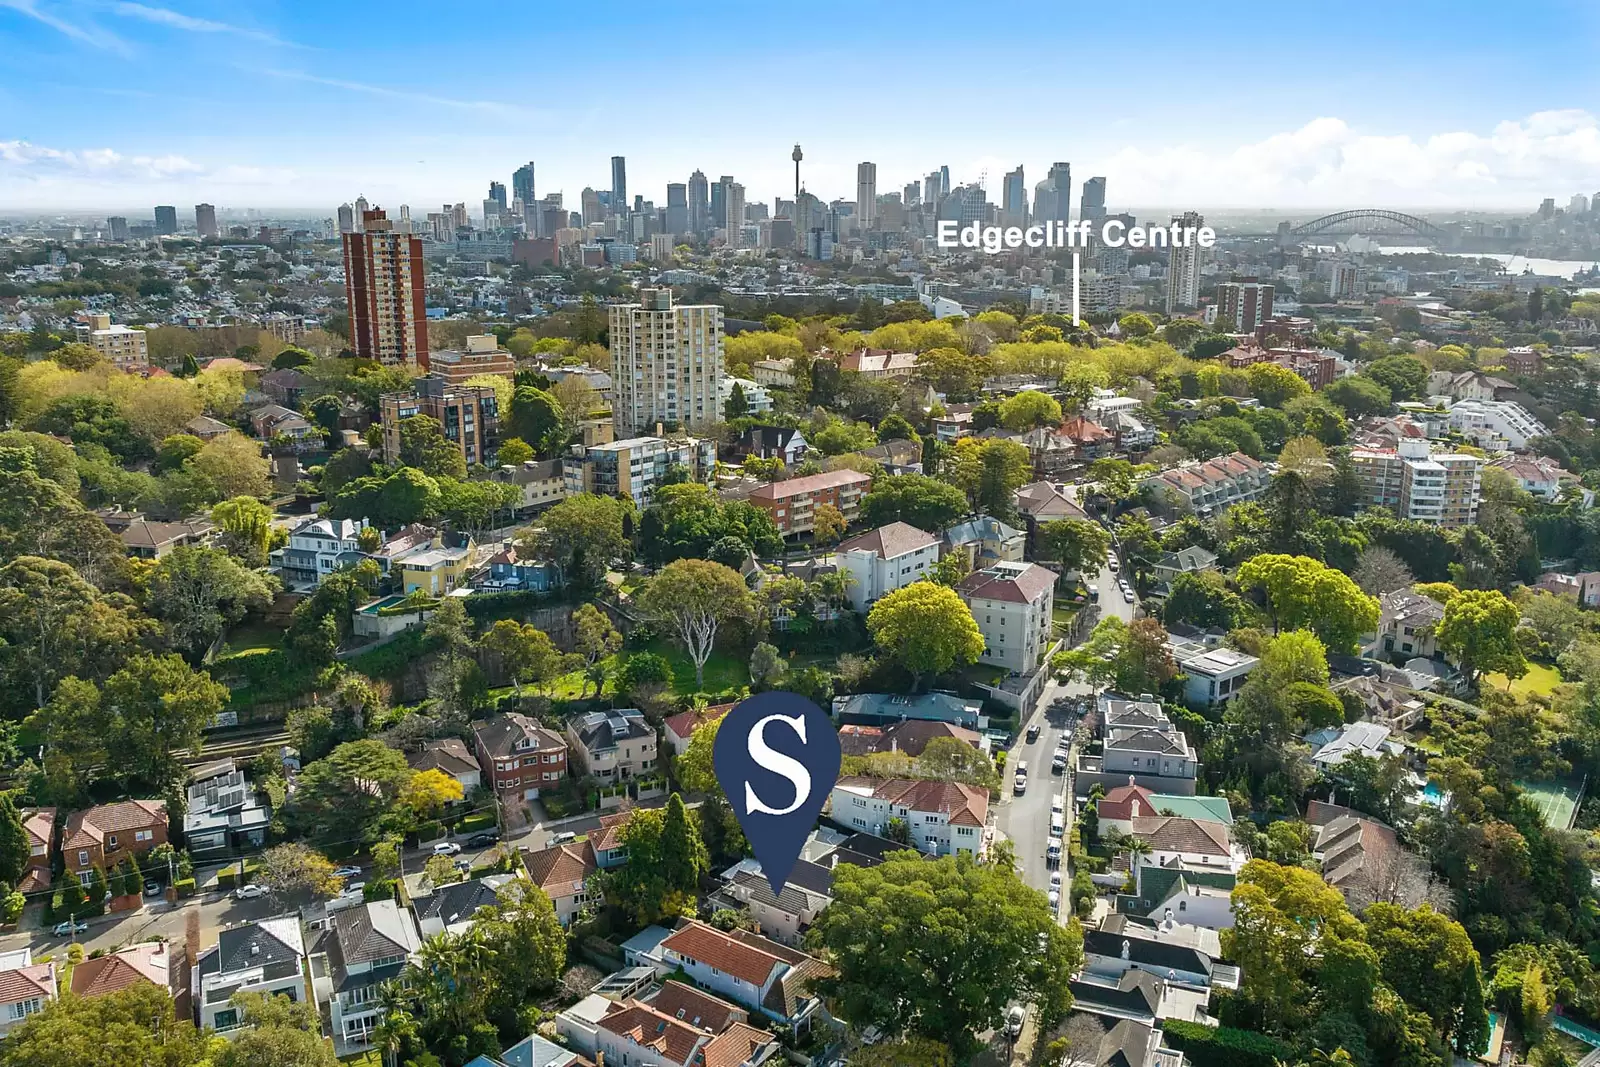 Photo #15: 15 Roslyndale Avenue, Woollahra - Sold by Sydney Sotheby's International Realty